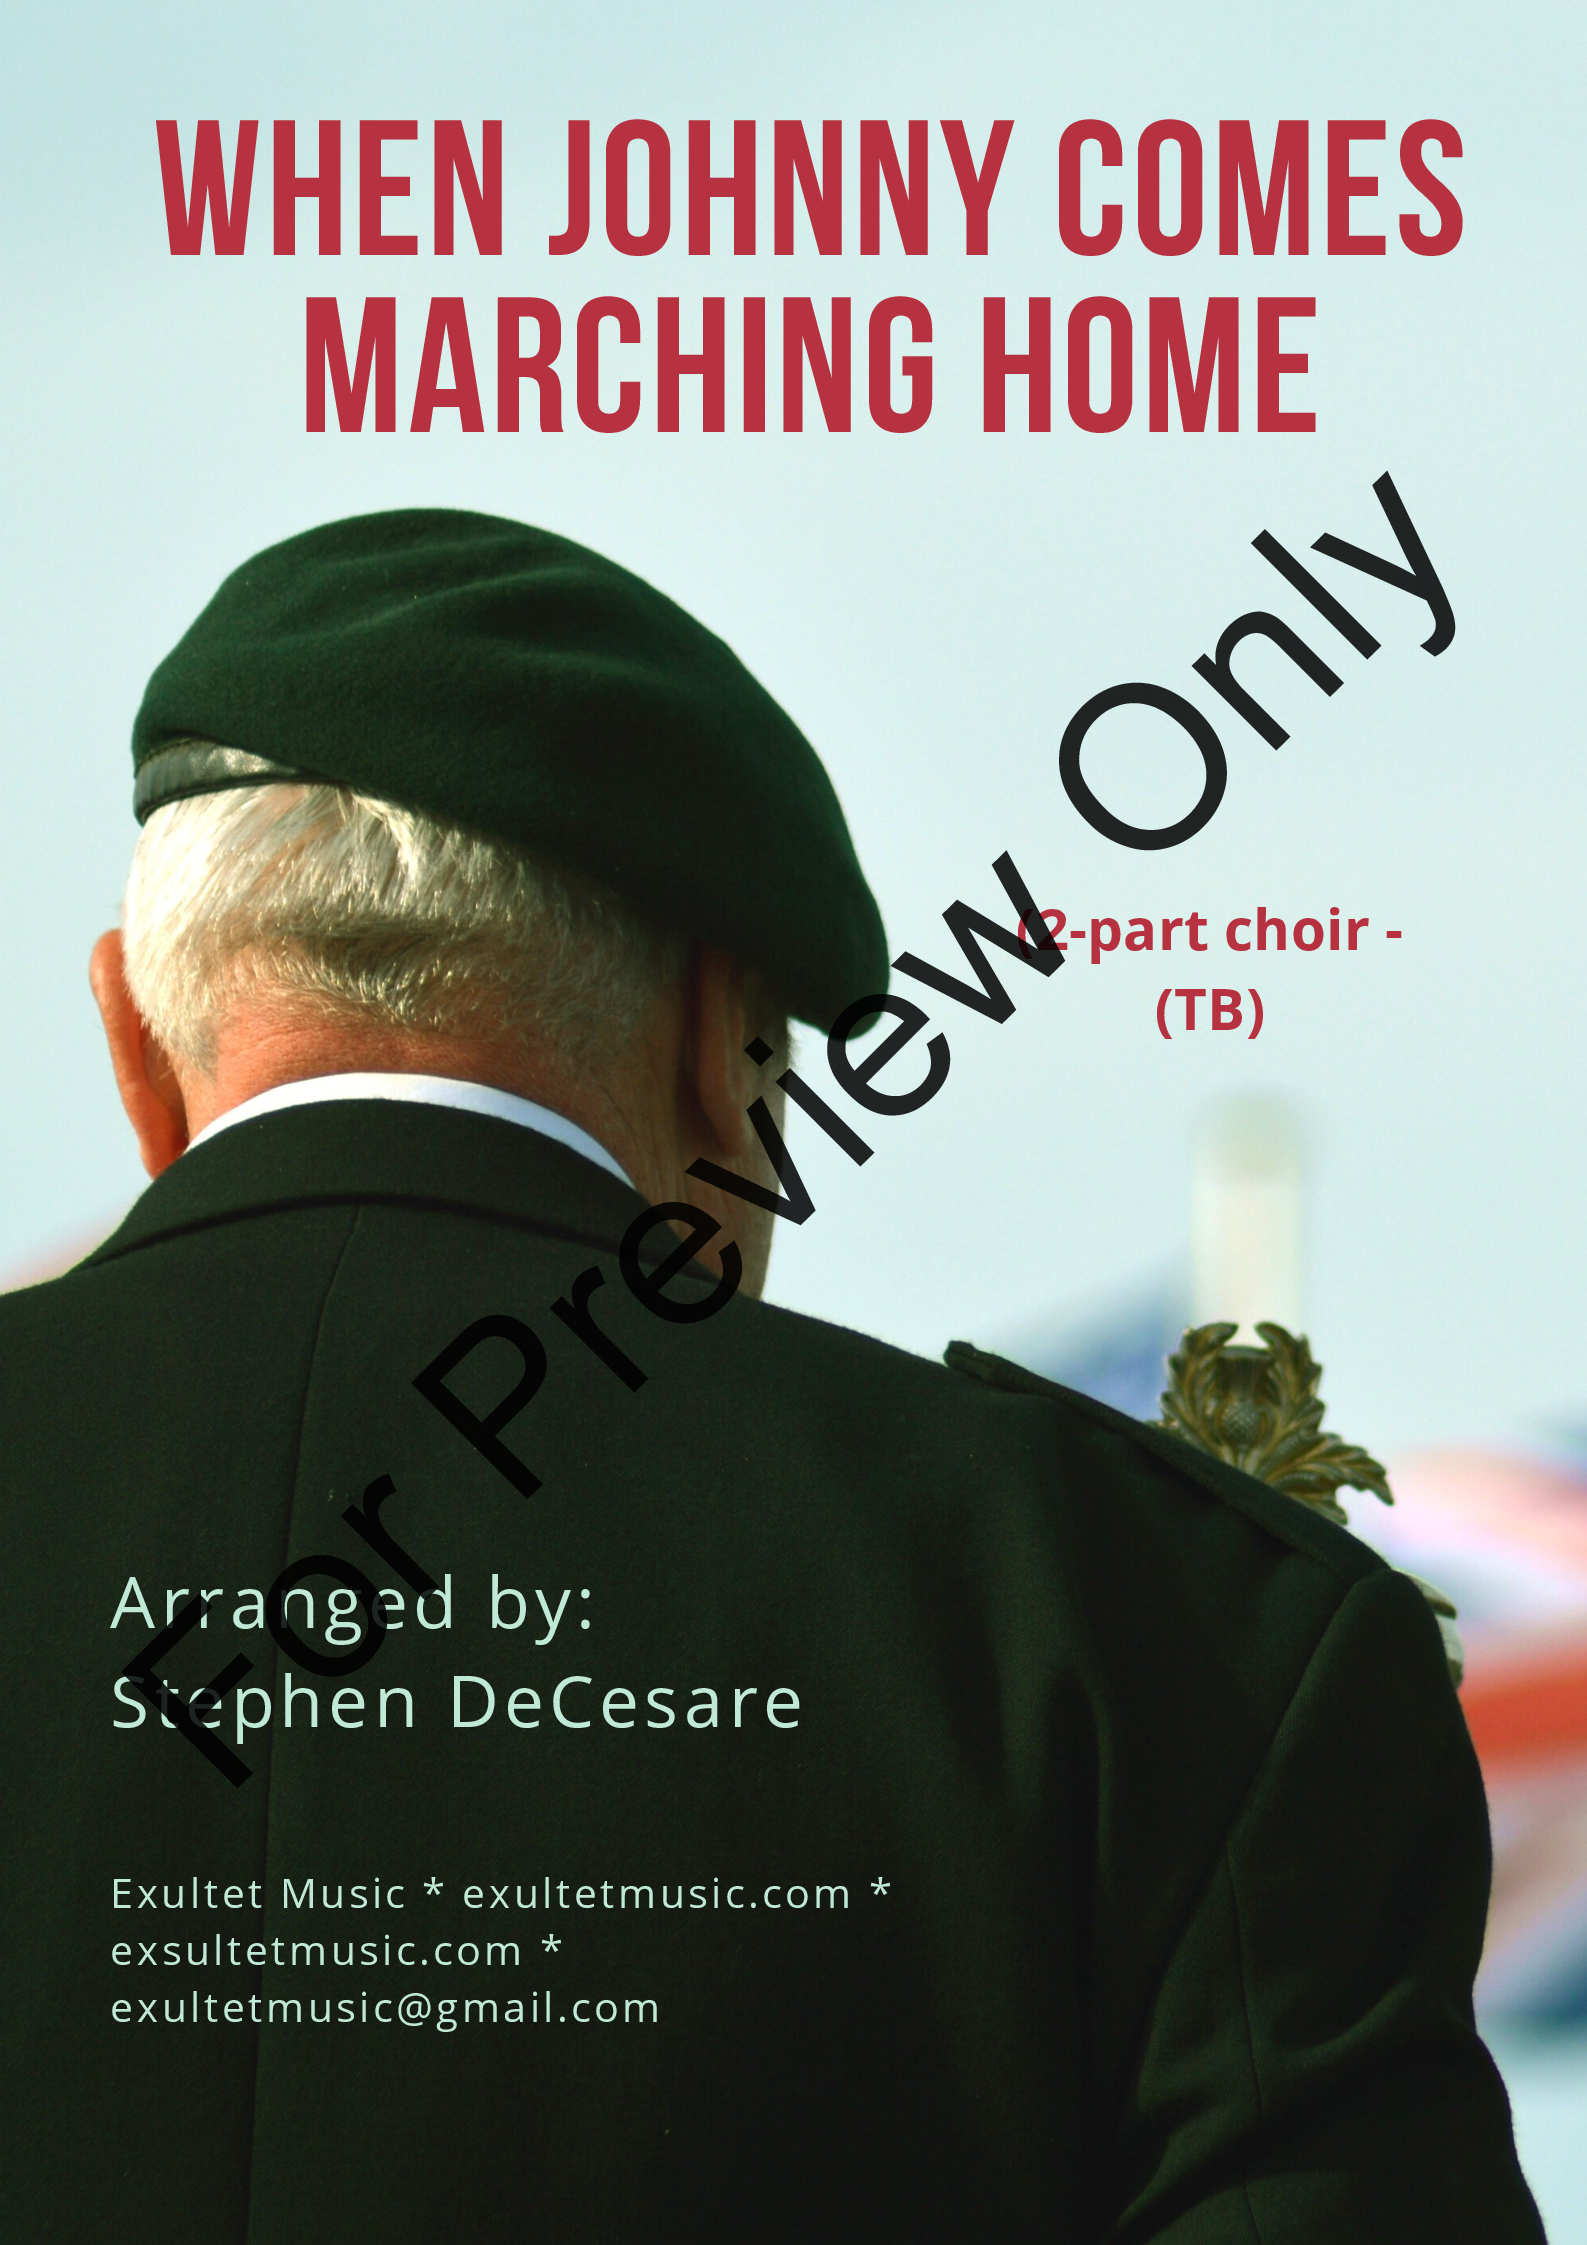 When Johnny Comes Marching Home: 2-part choir - (TB) P.O.D.